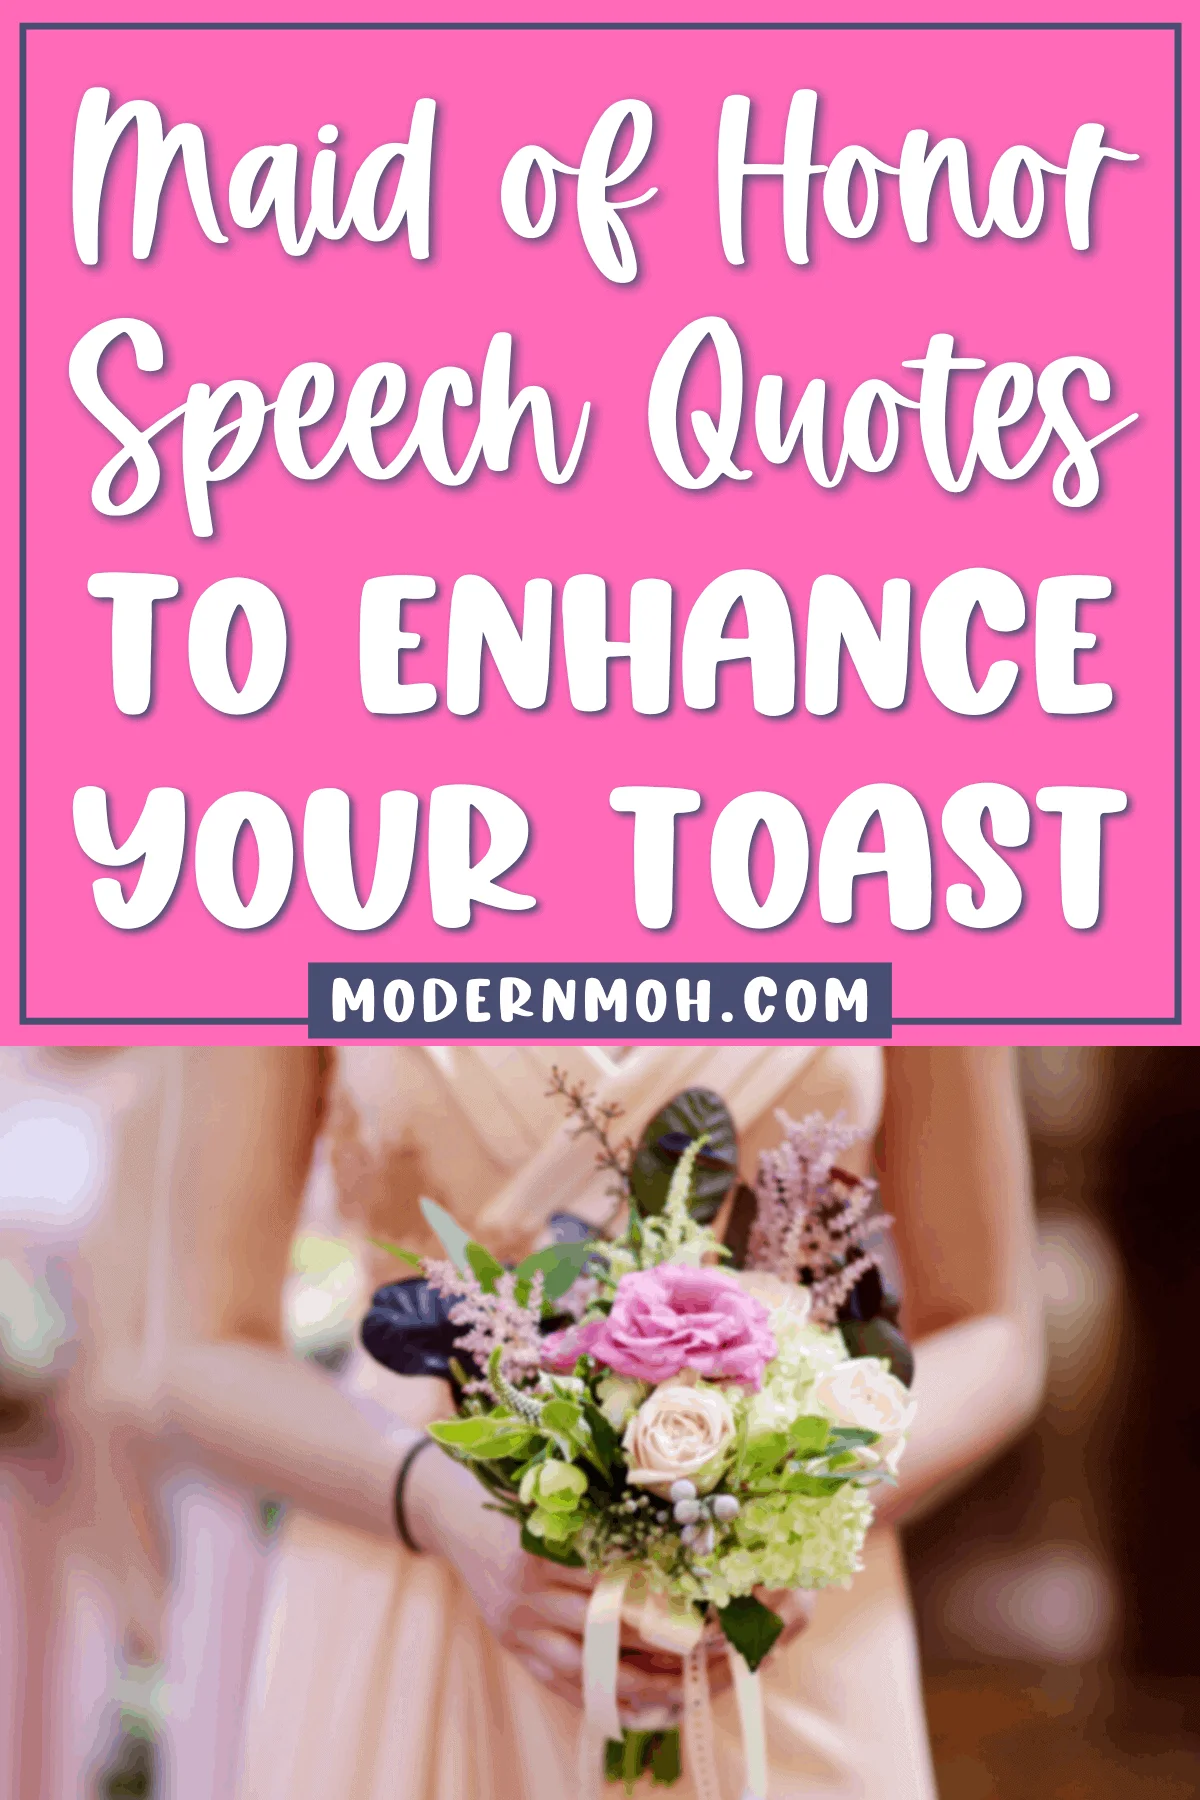 35 Maid of Honor Speech Quotes to Enhance Your Toast